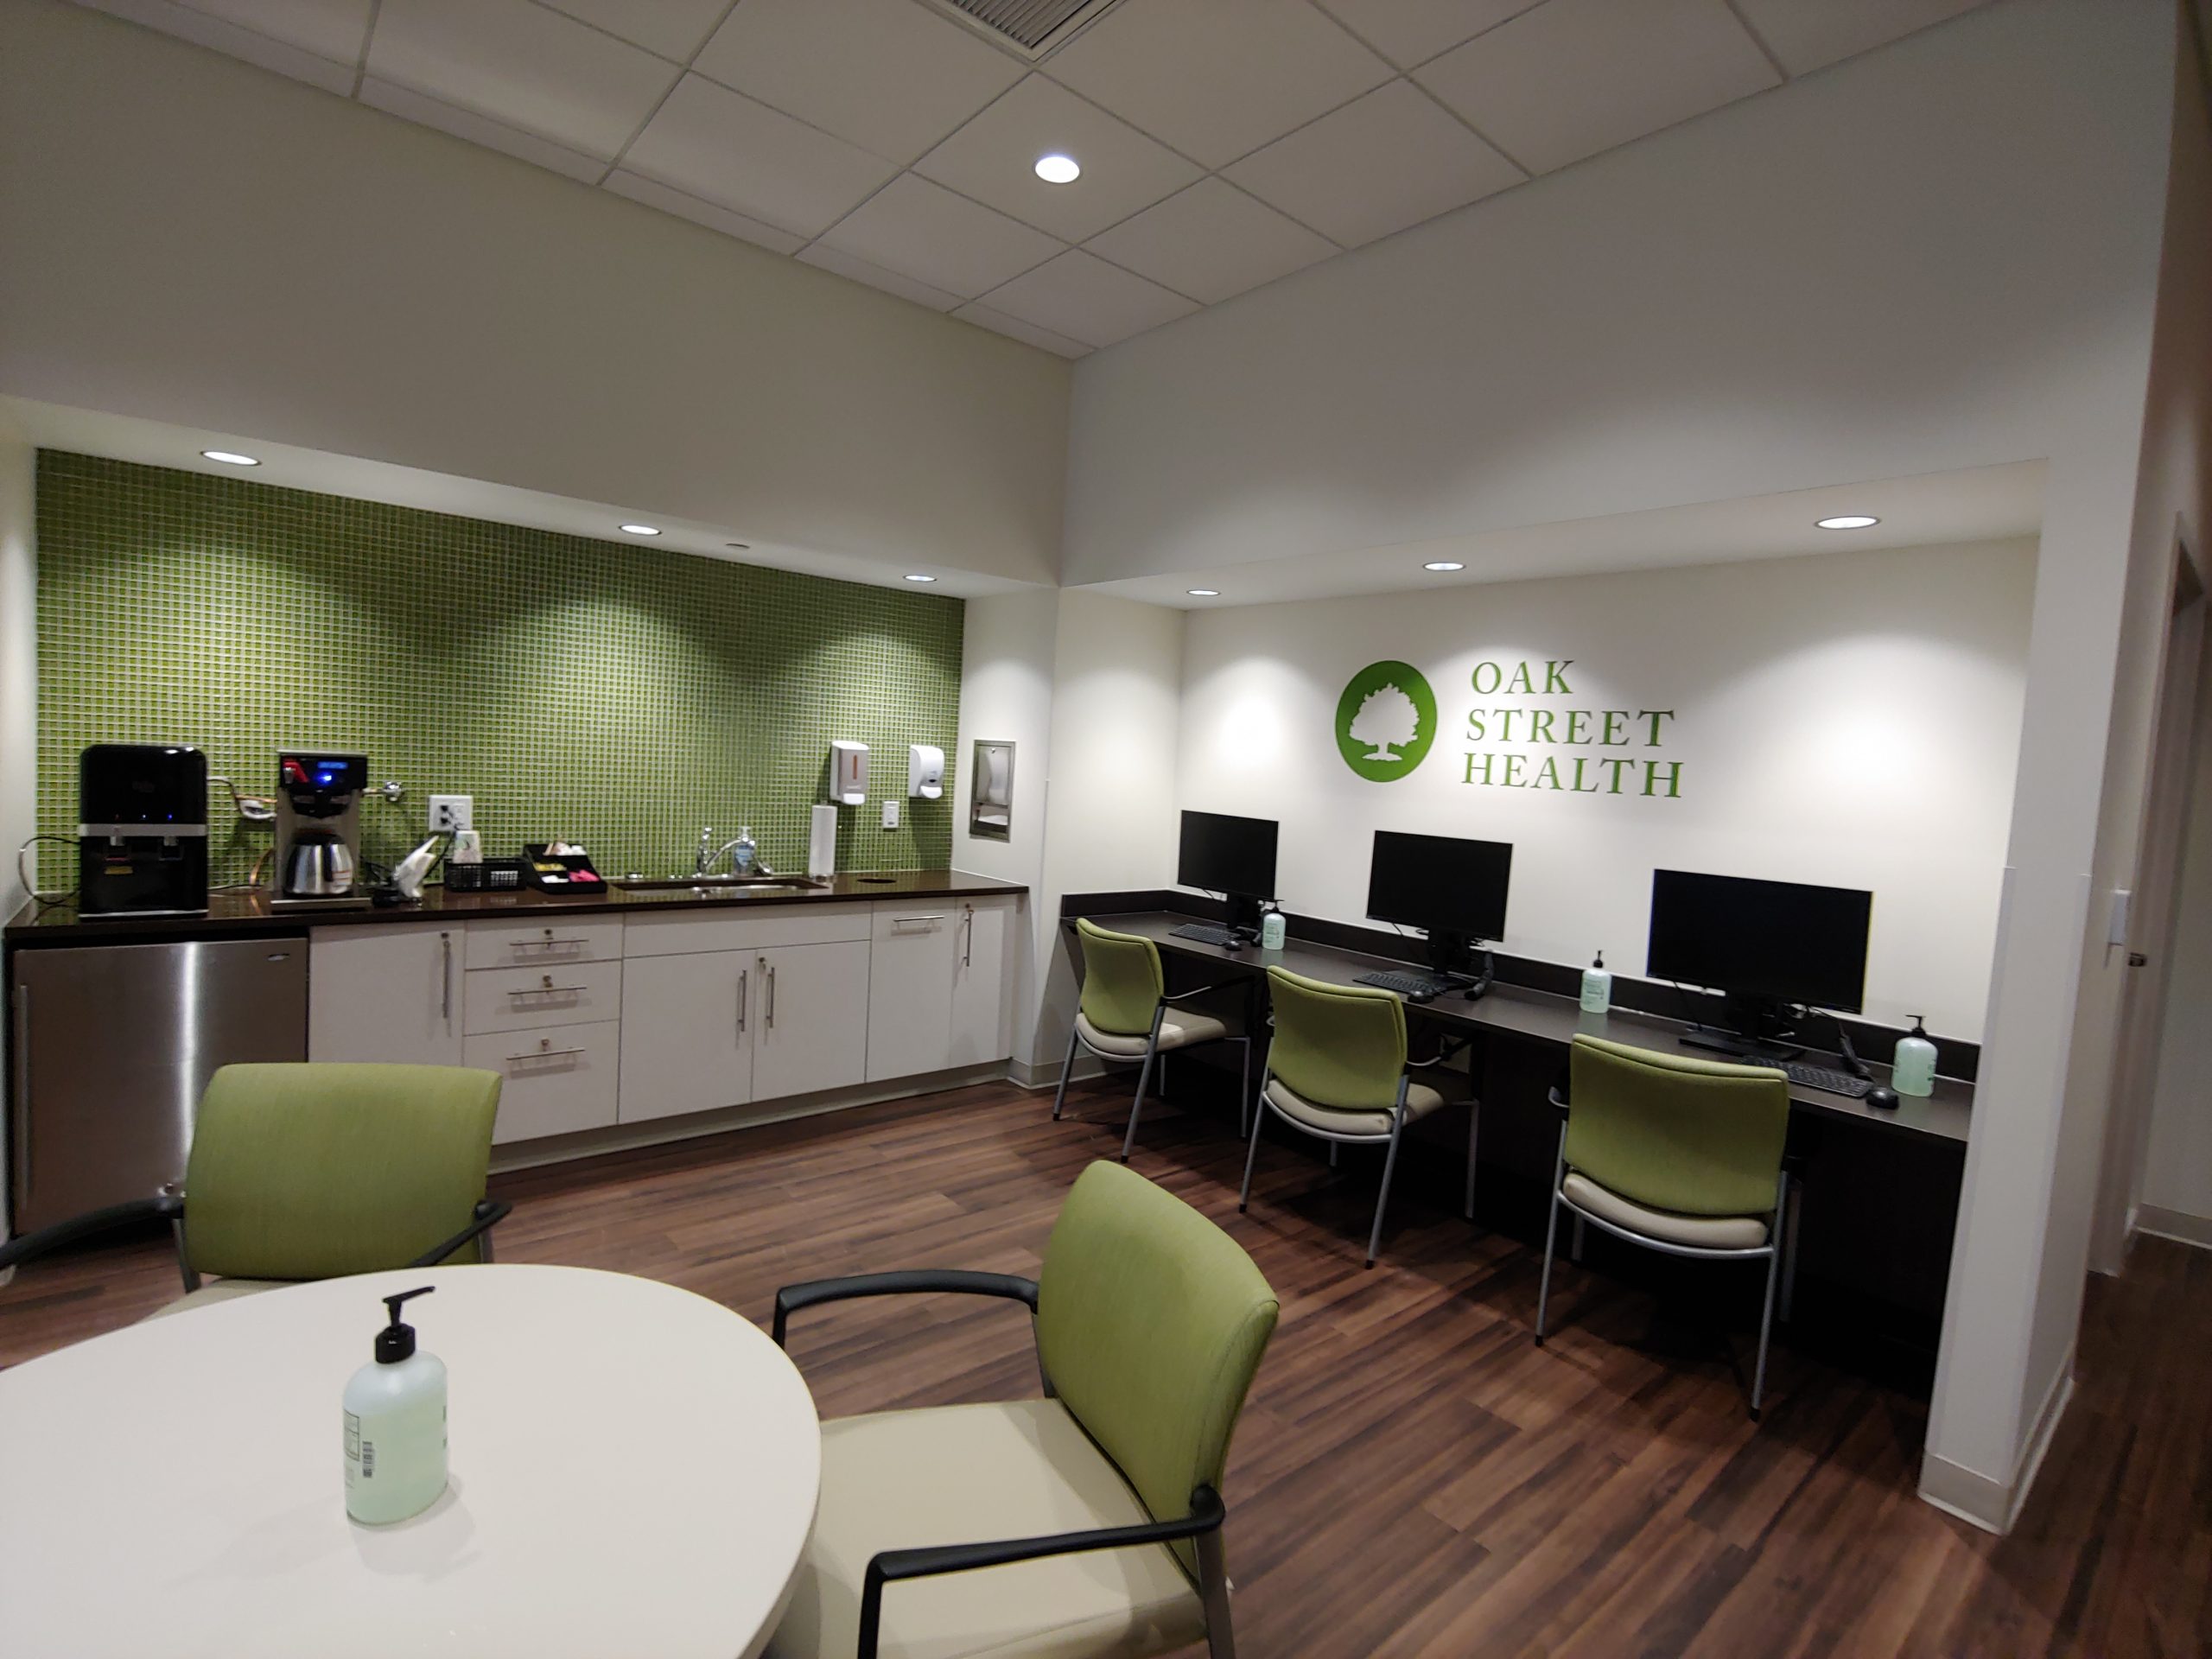 Oak Street Health in Center Point offering  more than wellness care